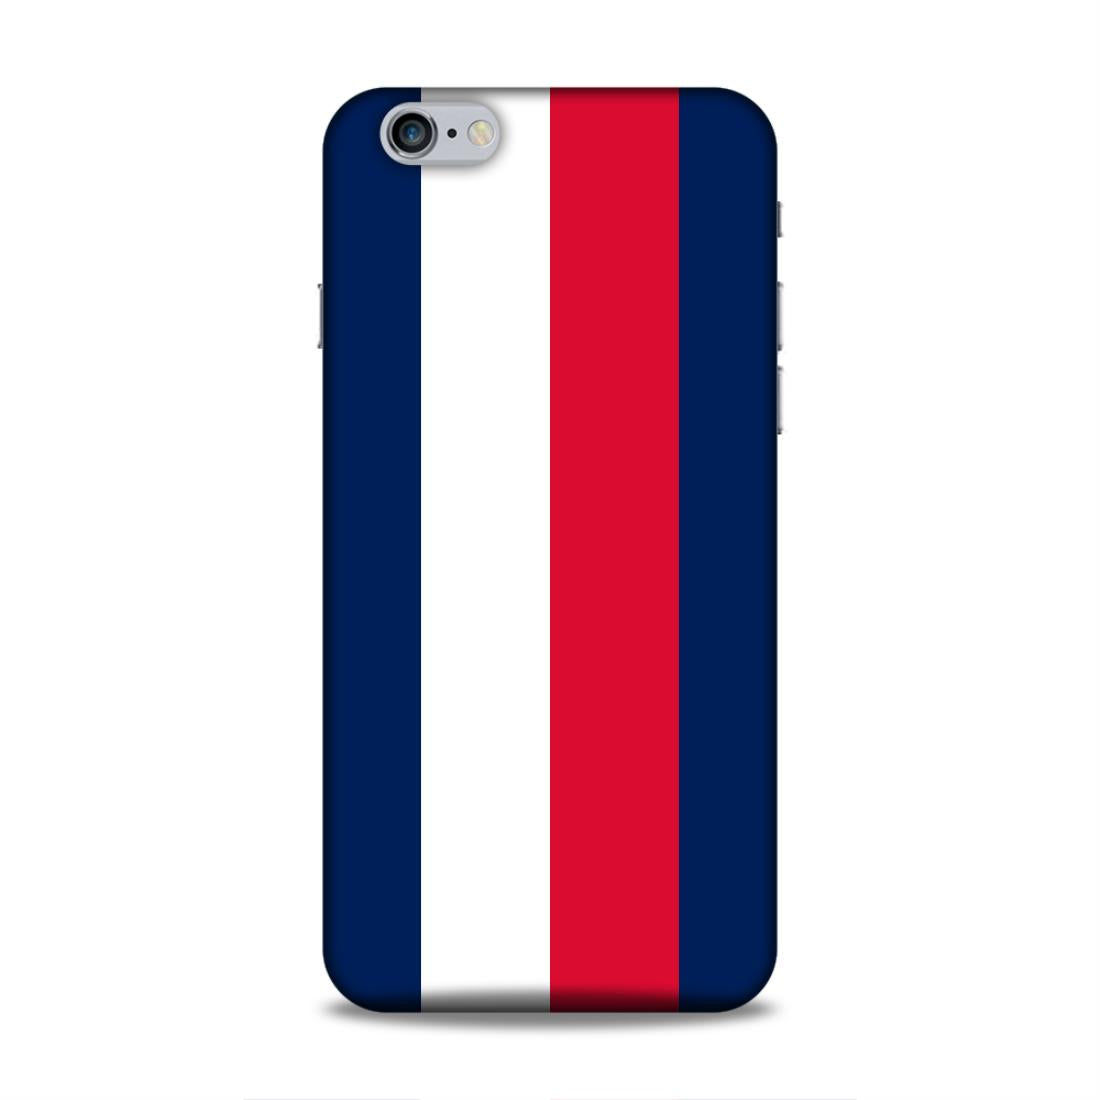 Blue White Red Pattern Hard Back Case For Apple iPhone 6 Plus / 6s Plus